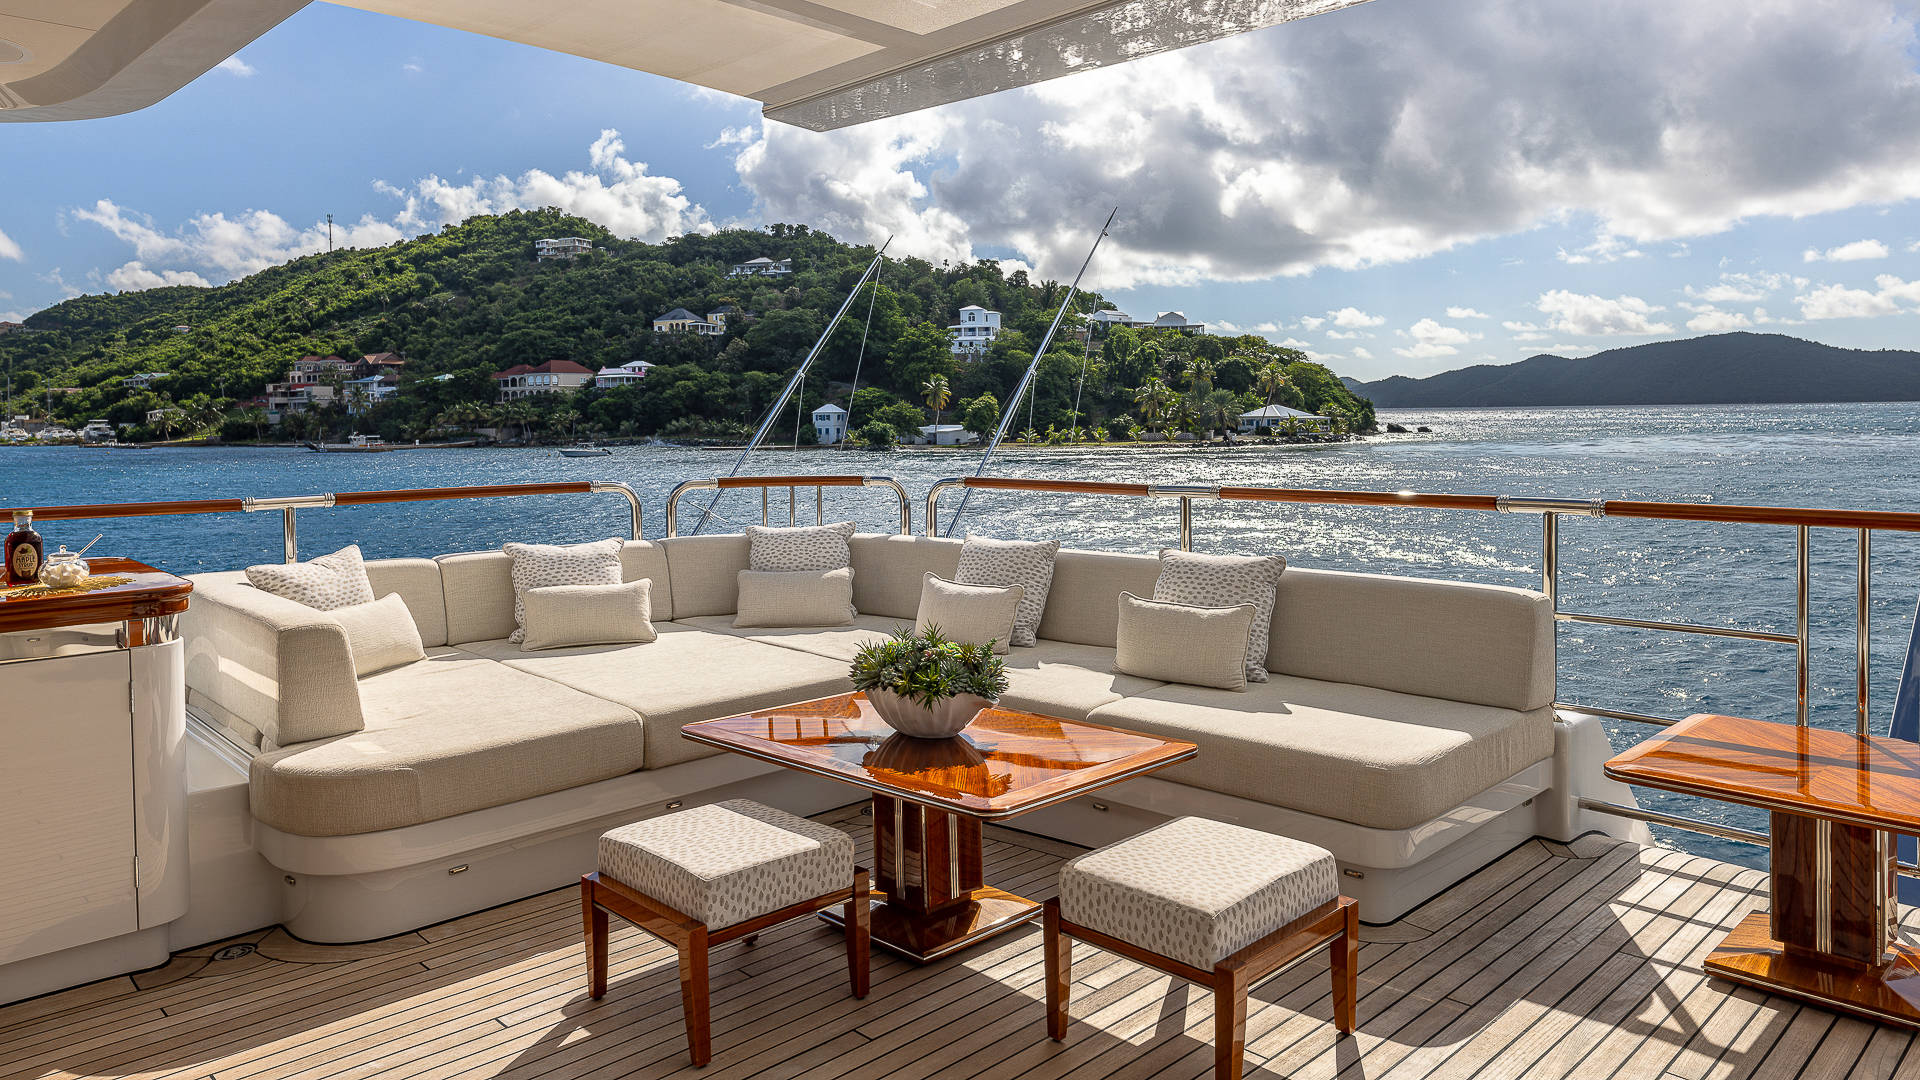 Rock It Sun Deck Starboard Aft Seating Credit Yachting Image